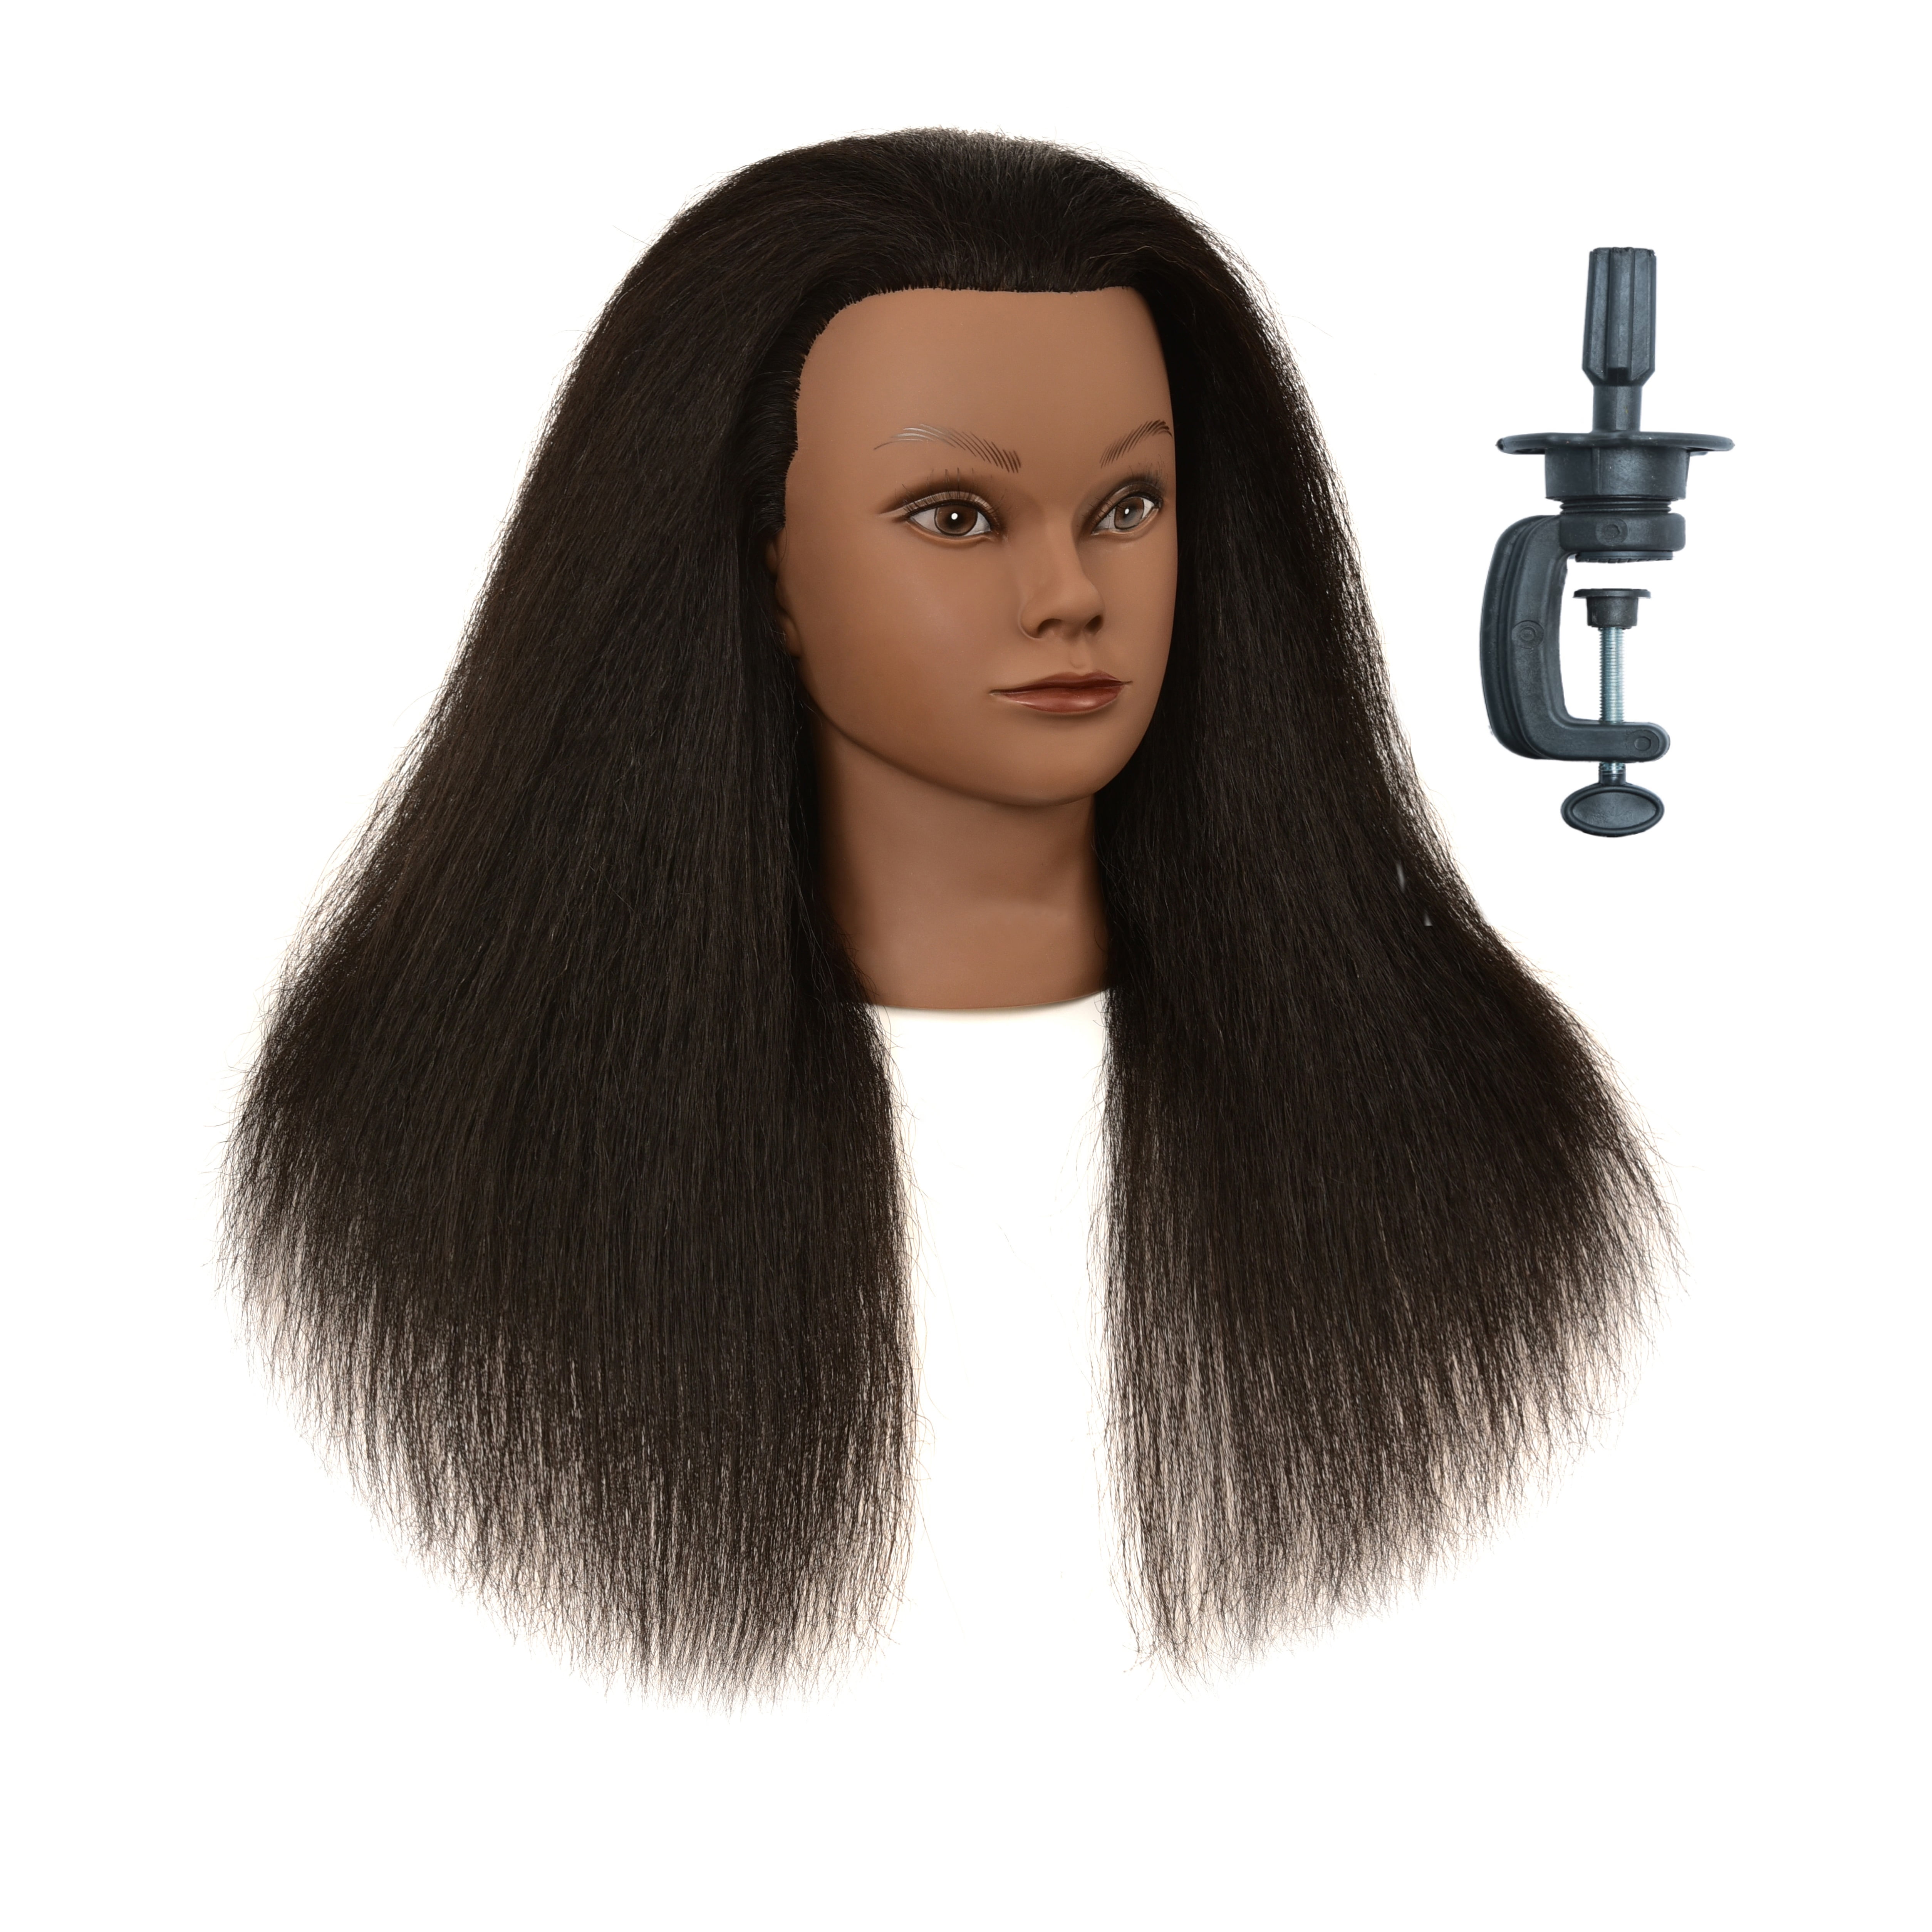 Mannequin Head with Human Hair 100% Real Hair Manikin Cosmetology Doll Head Hairdresser Practice Styling Training Head with Free Clamp Holder (16